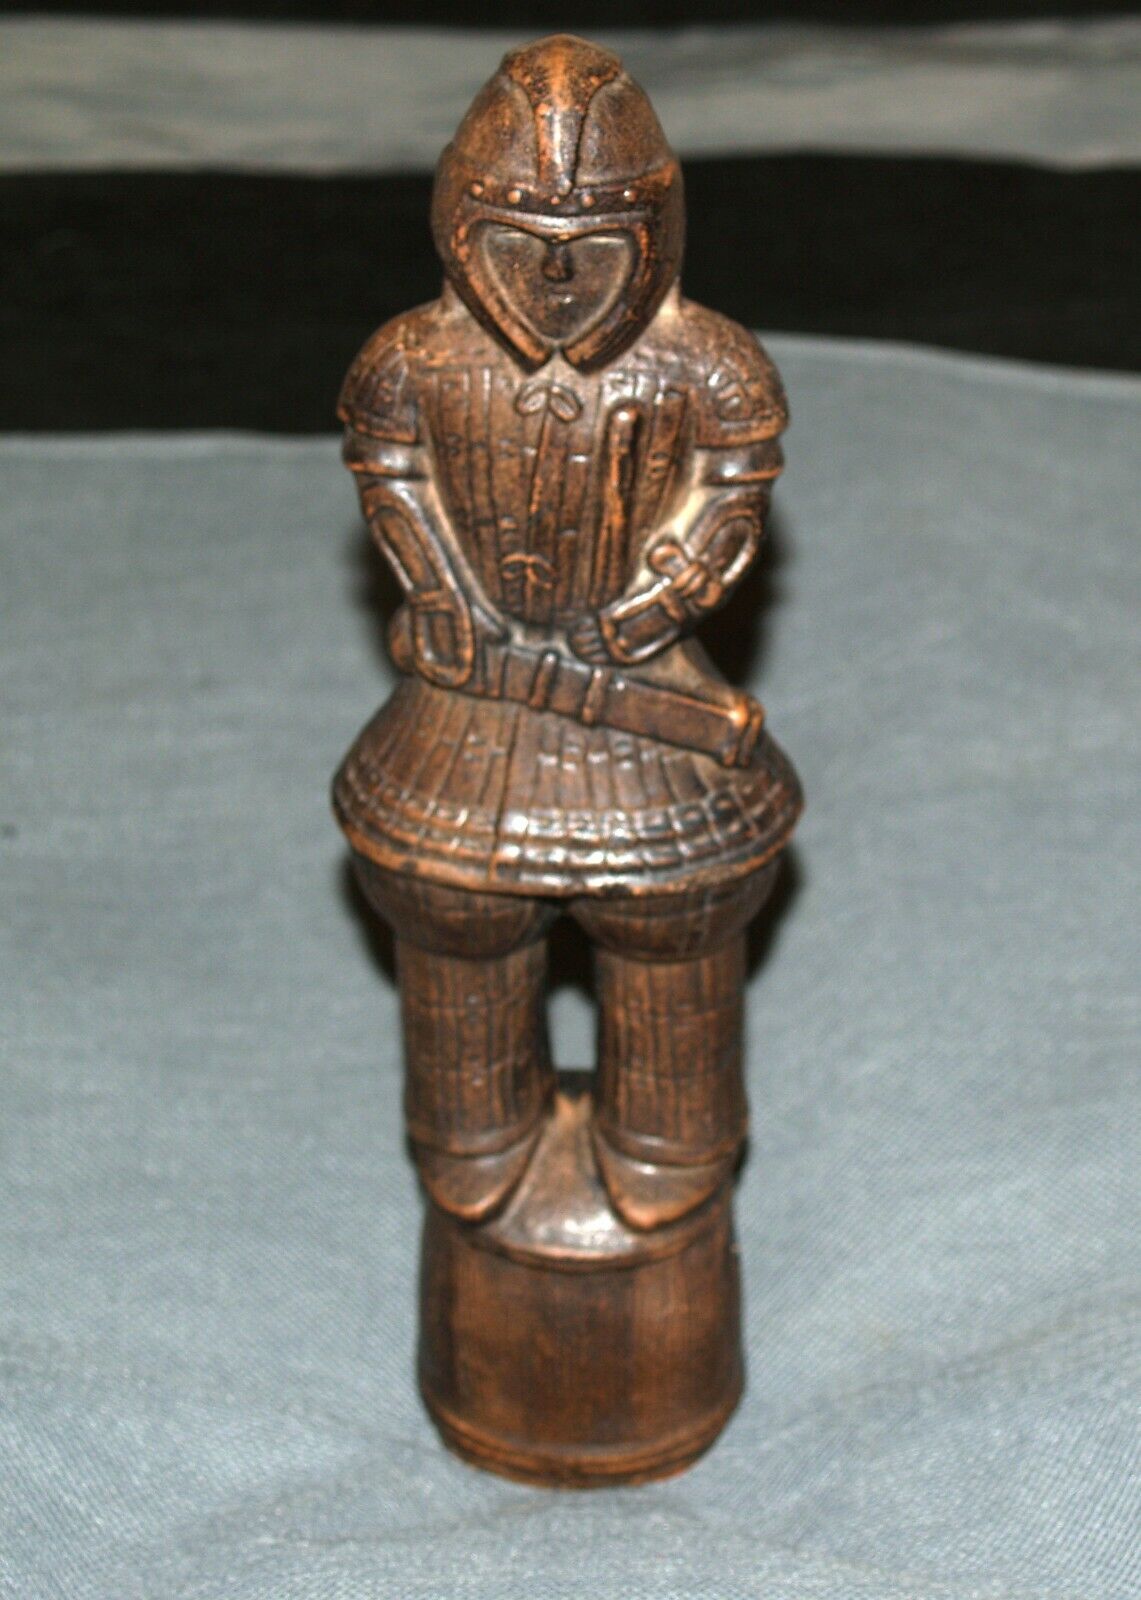 Antique tourist piece from Japan statue of a Hanawa warrior 11.5" tall